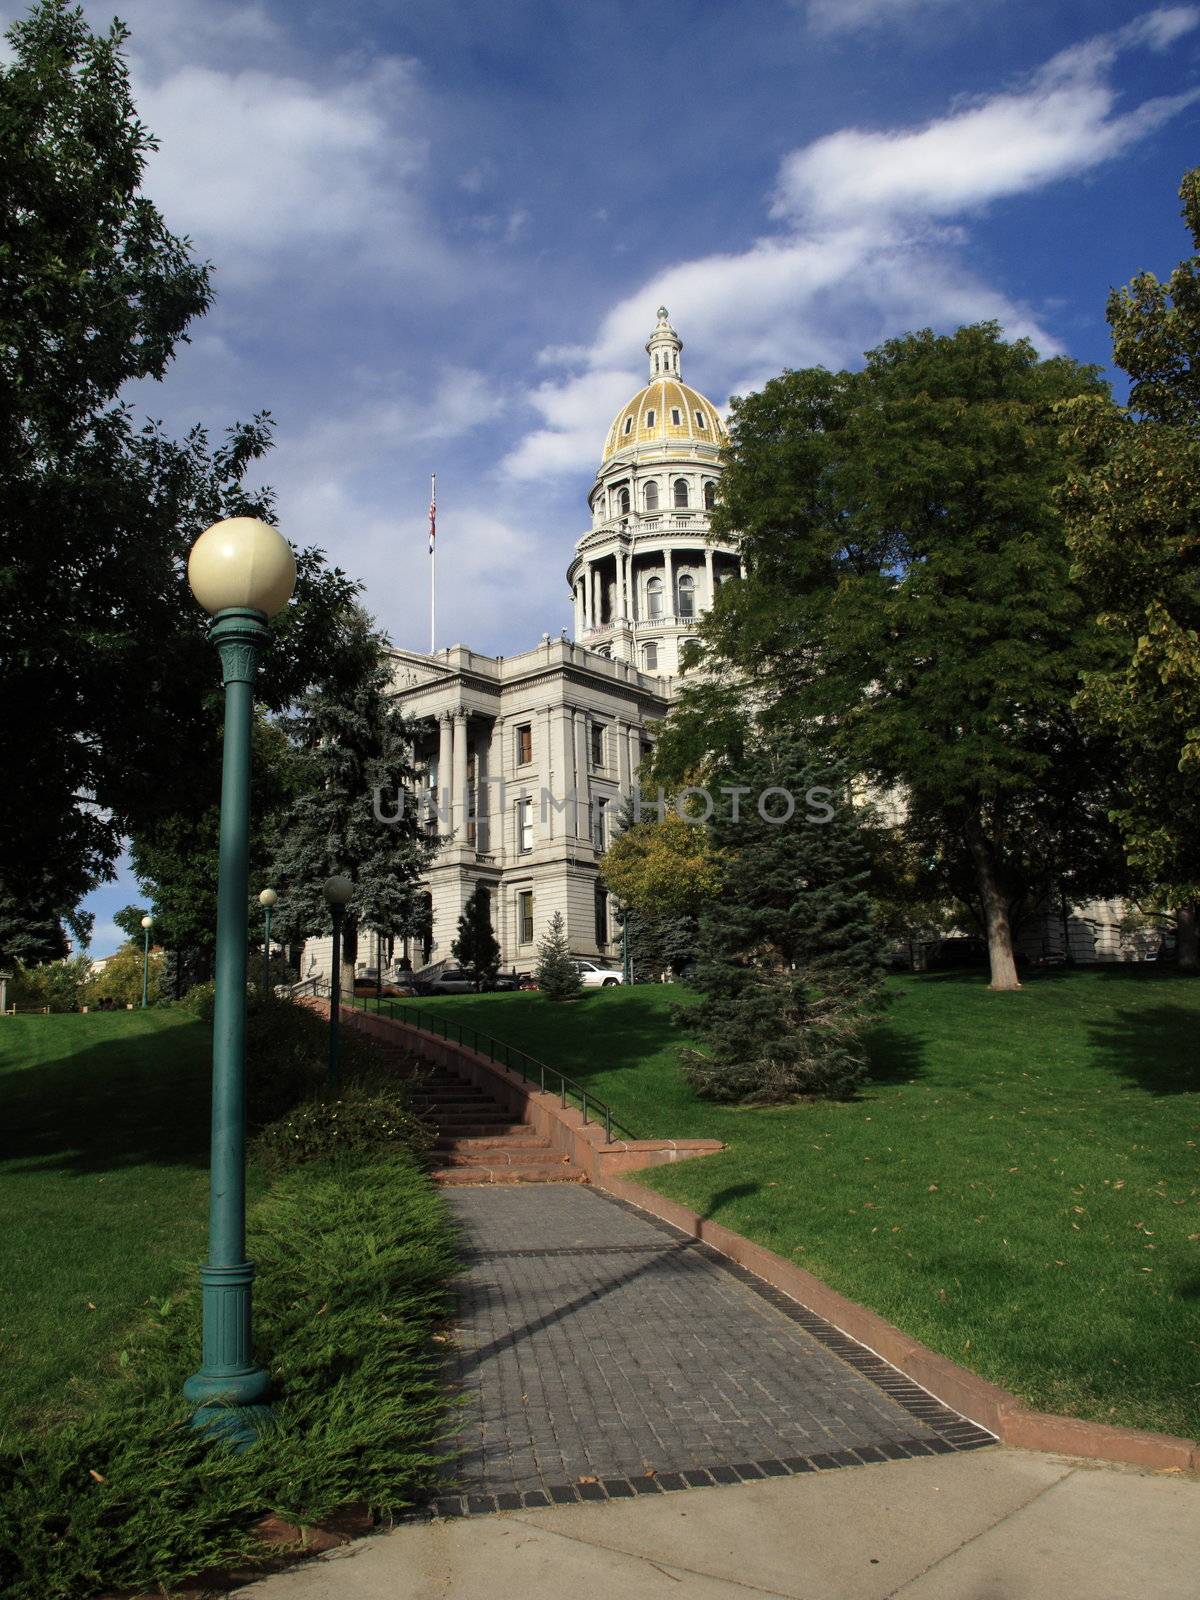 Denver tourist attraction reminiscent of United States Capitol.